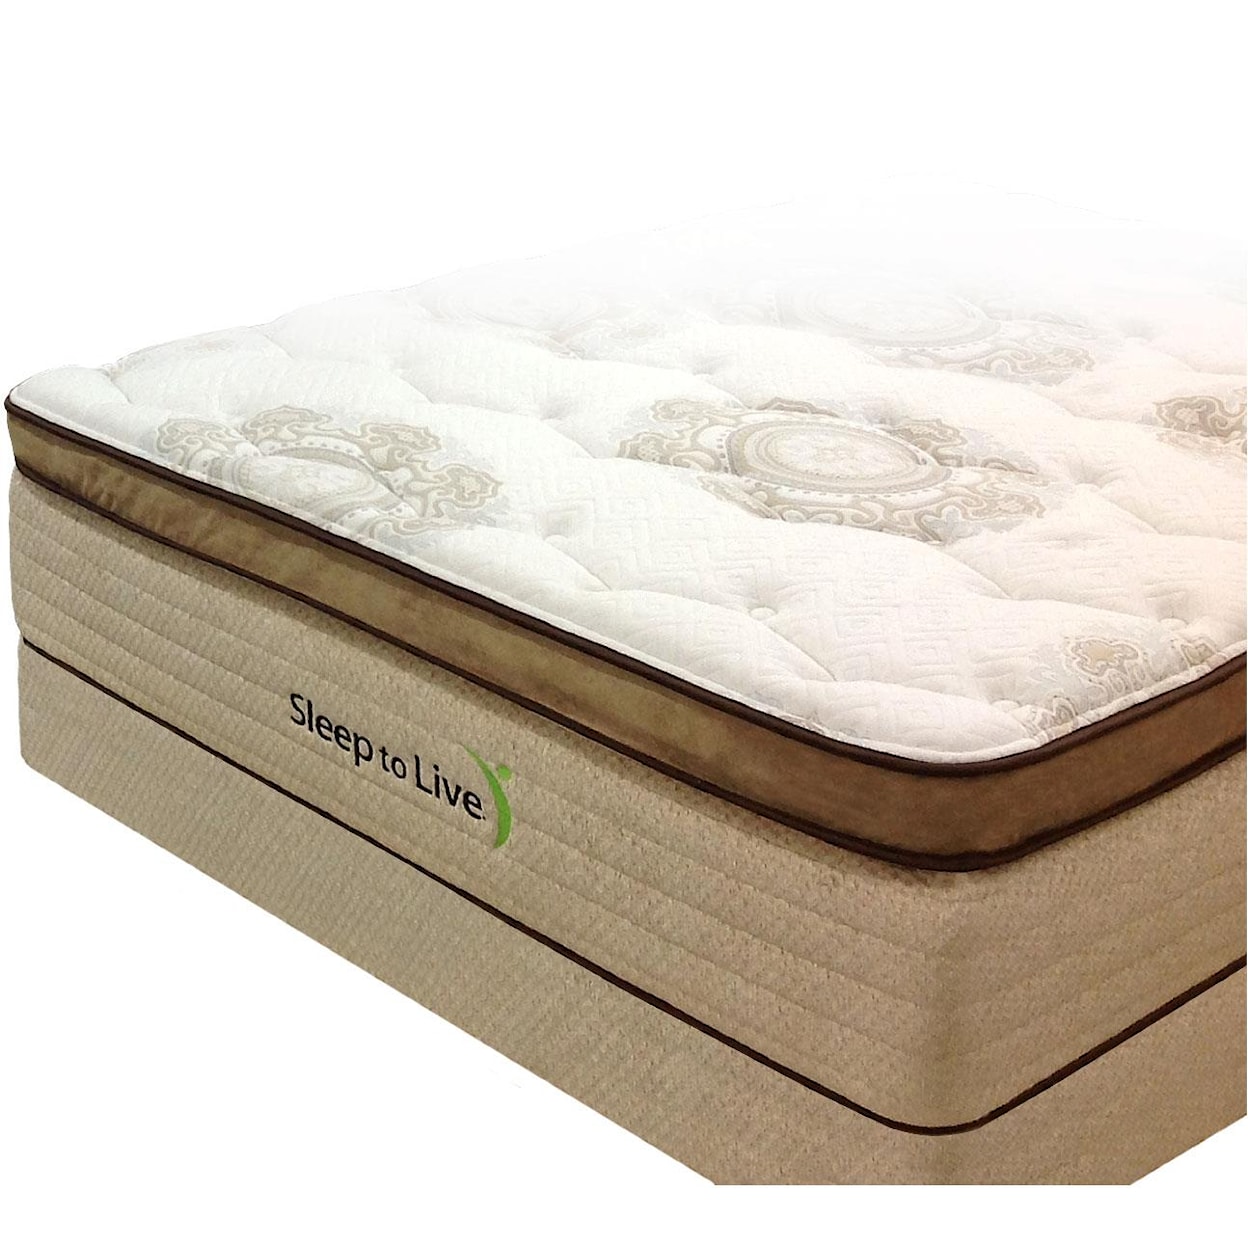 Kingsdown Body System 4 Twin XL Pocketed Coil Mattress